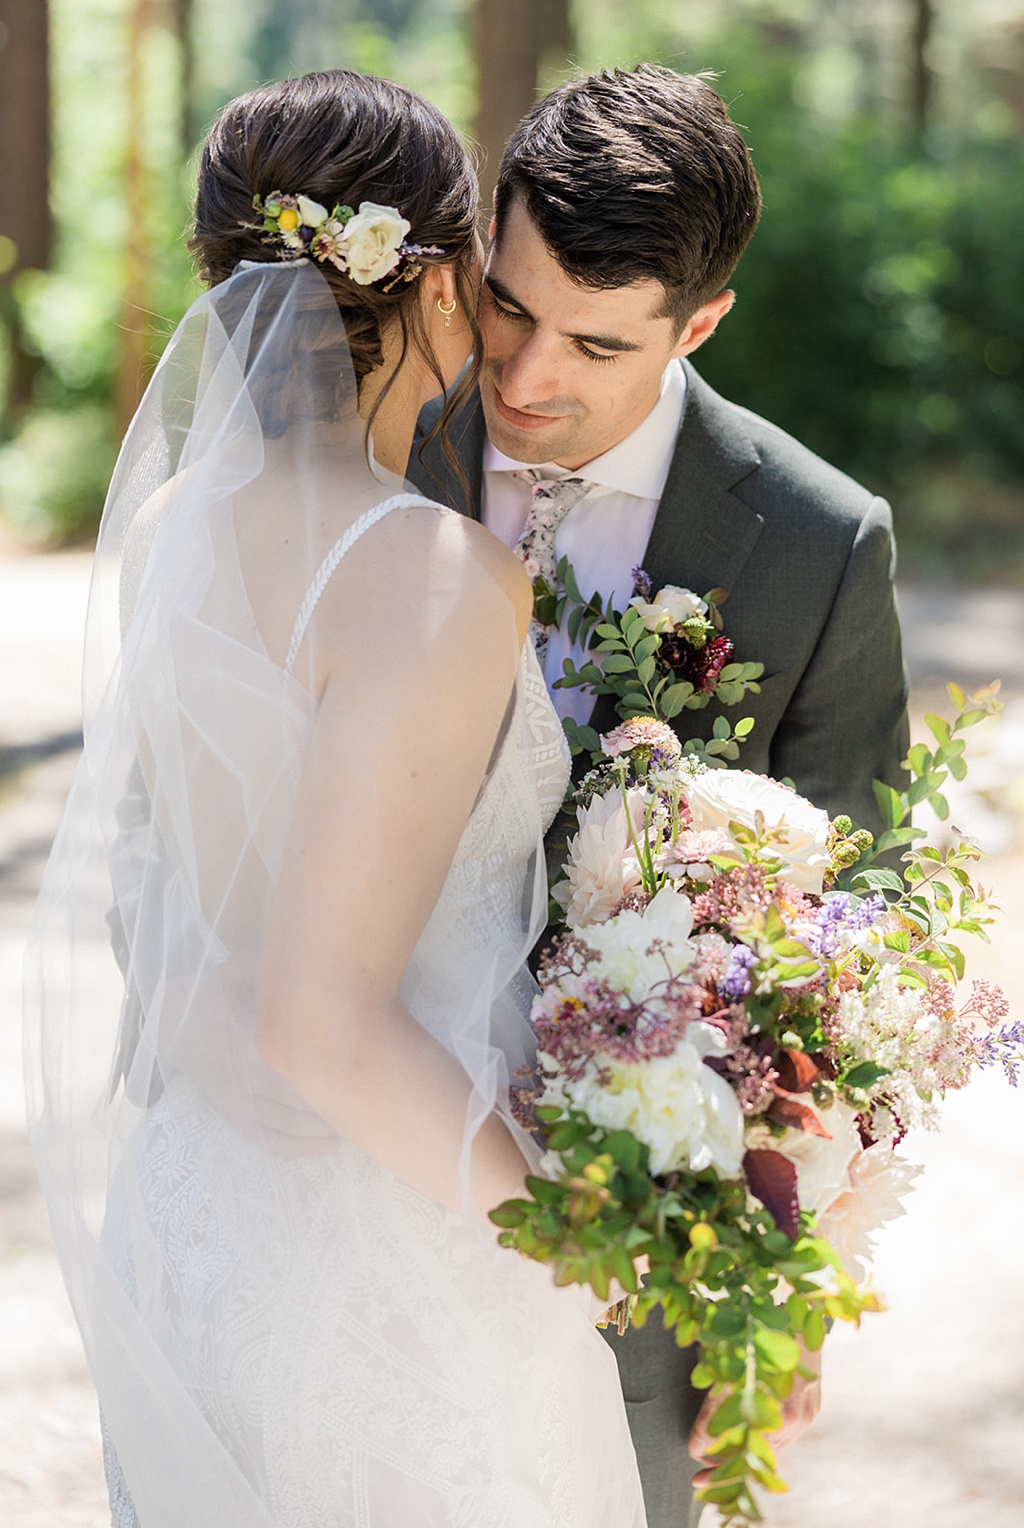 The bride and groom embrace, showing off her hair flowers